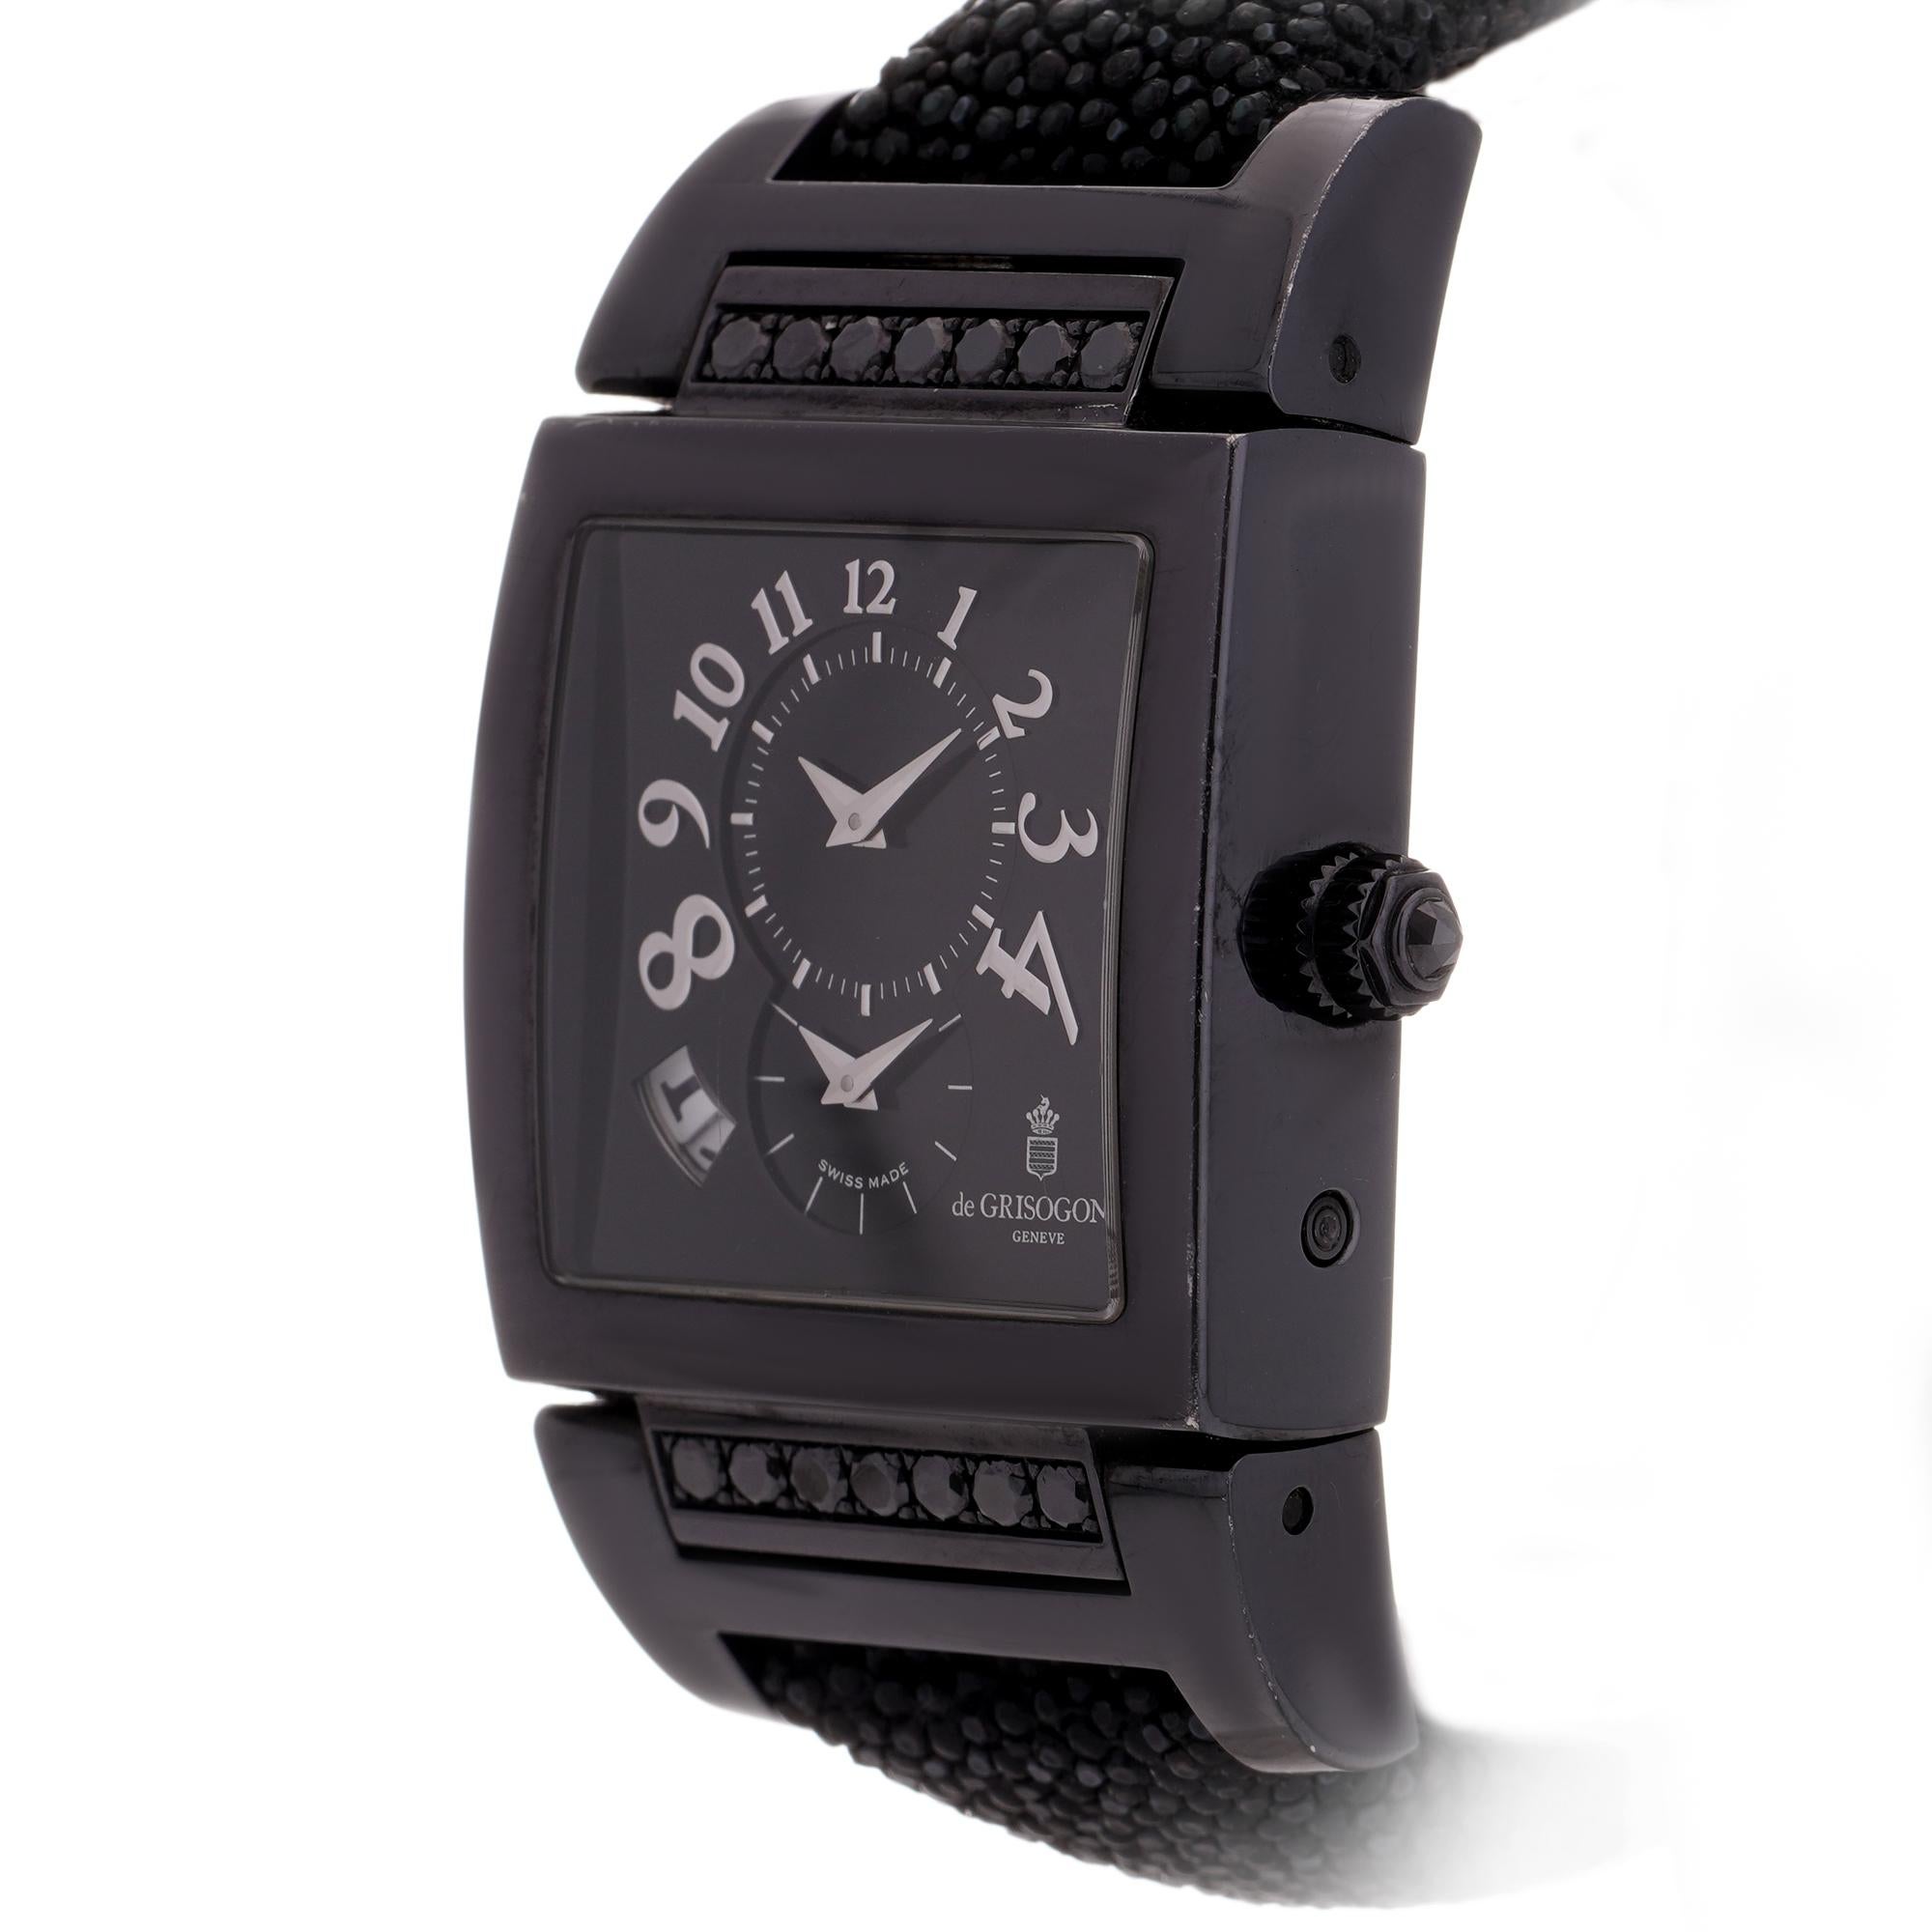 De Grisogno Instrumento N°UNO Black PVD Black Gem Automatic Unisex Watch In Good Condition For Sale In Braintree, GB